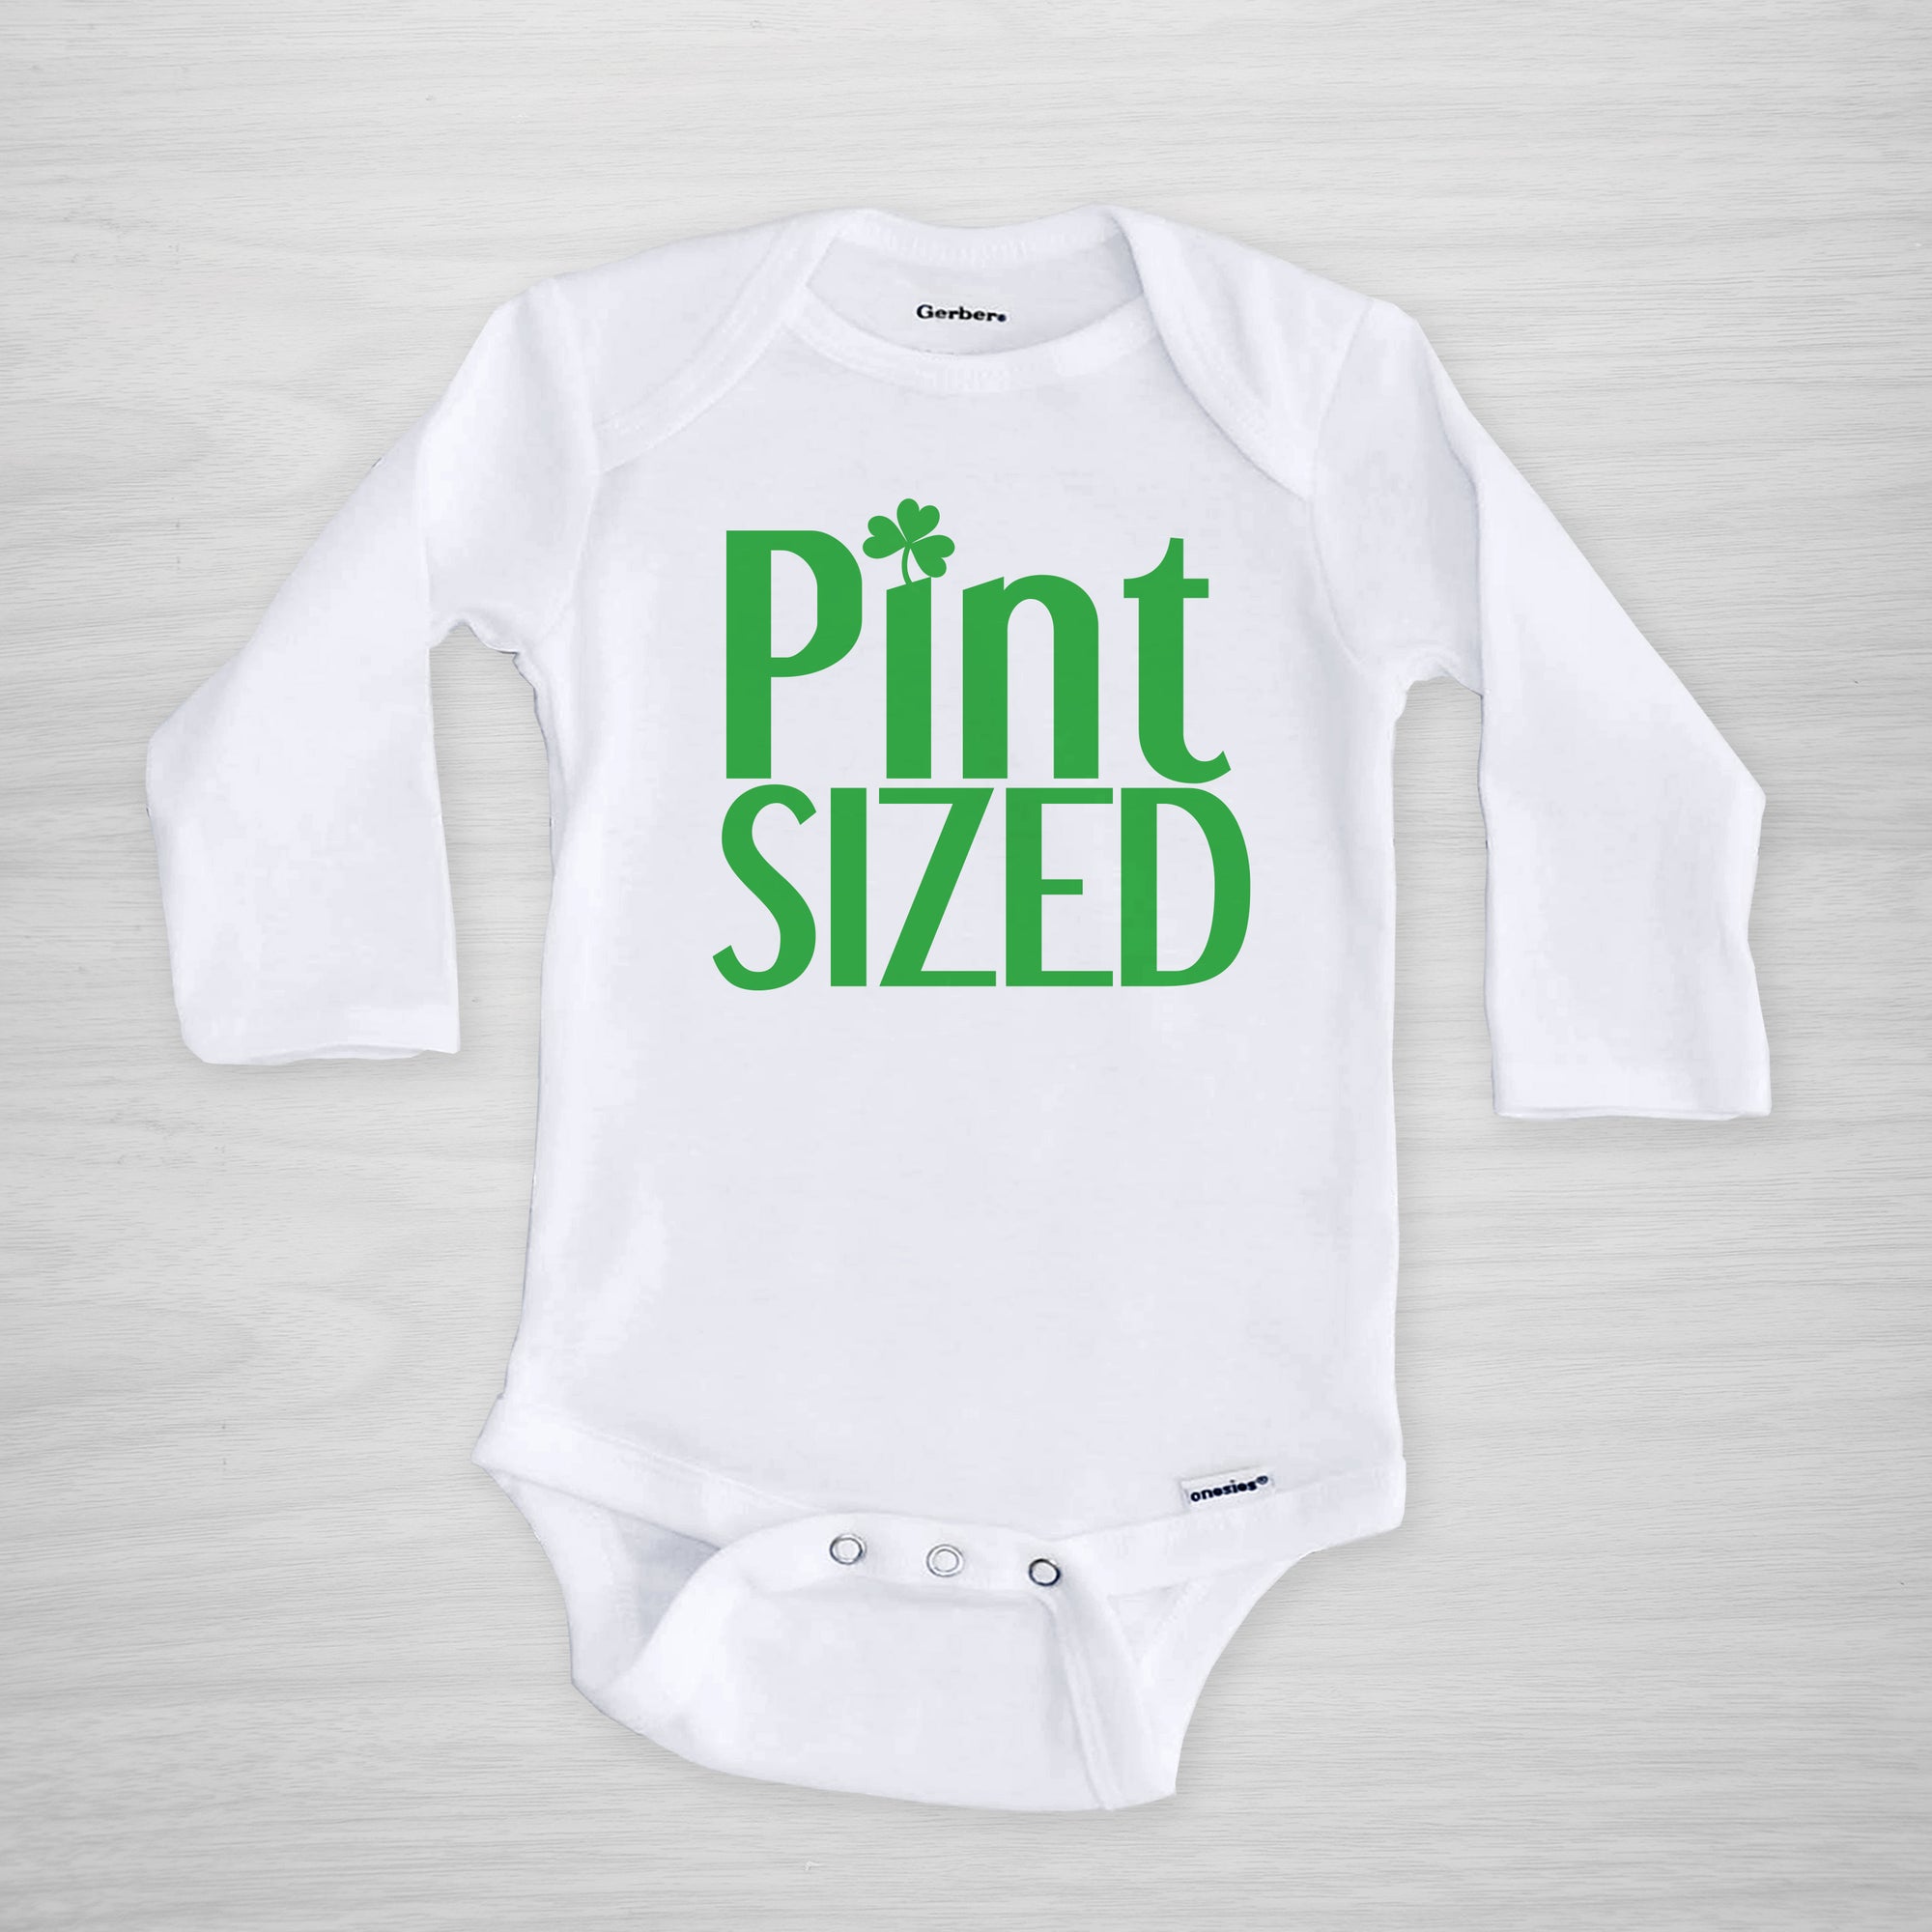 Pint Sized St. Patrick's Day Onesie®, Printed with super soft eco safe inks, Long sleeved